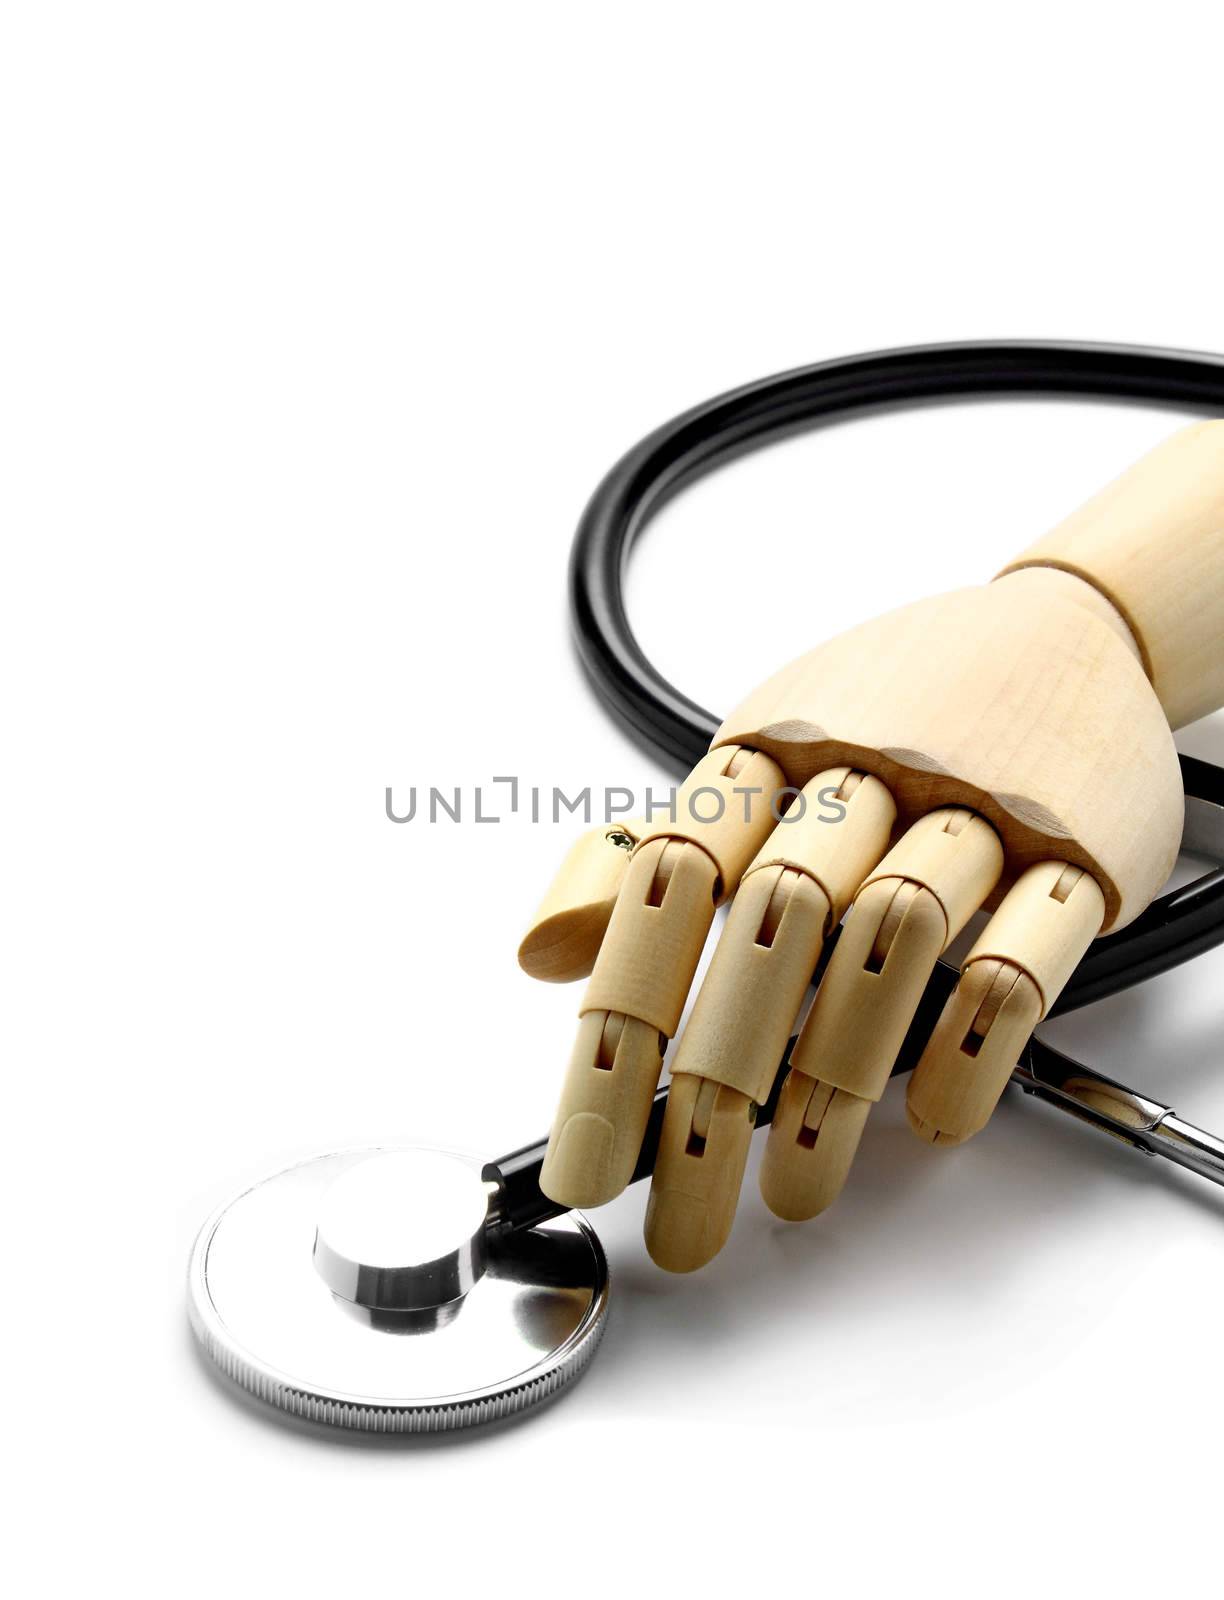 Stethoscope and wooden hand on white